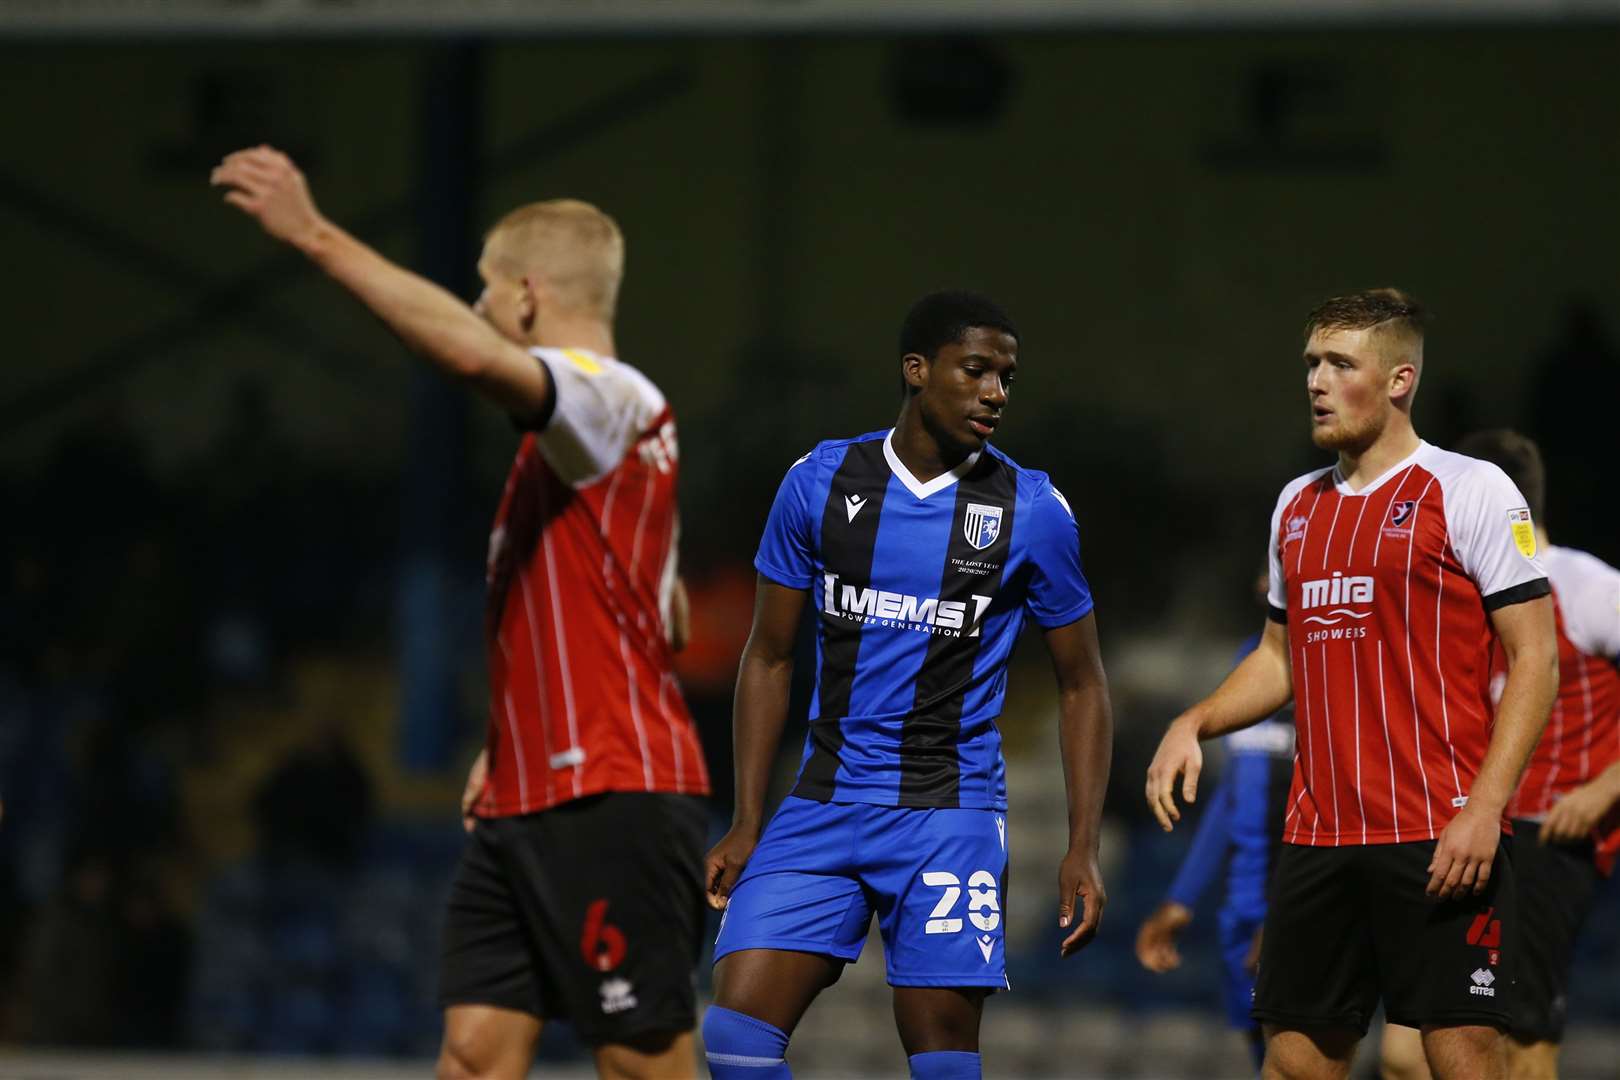 Joe Gbode is one of several youth players to have featured for the Gillingham senior side recently